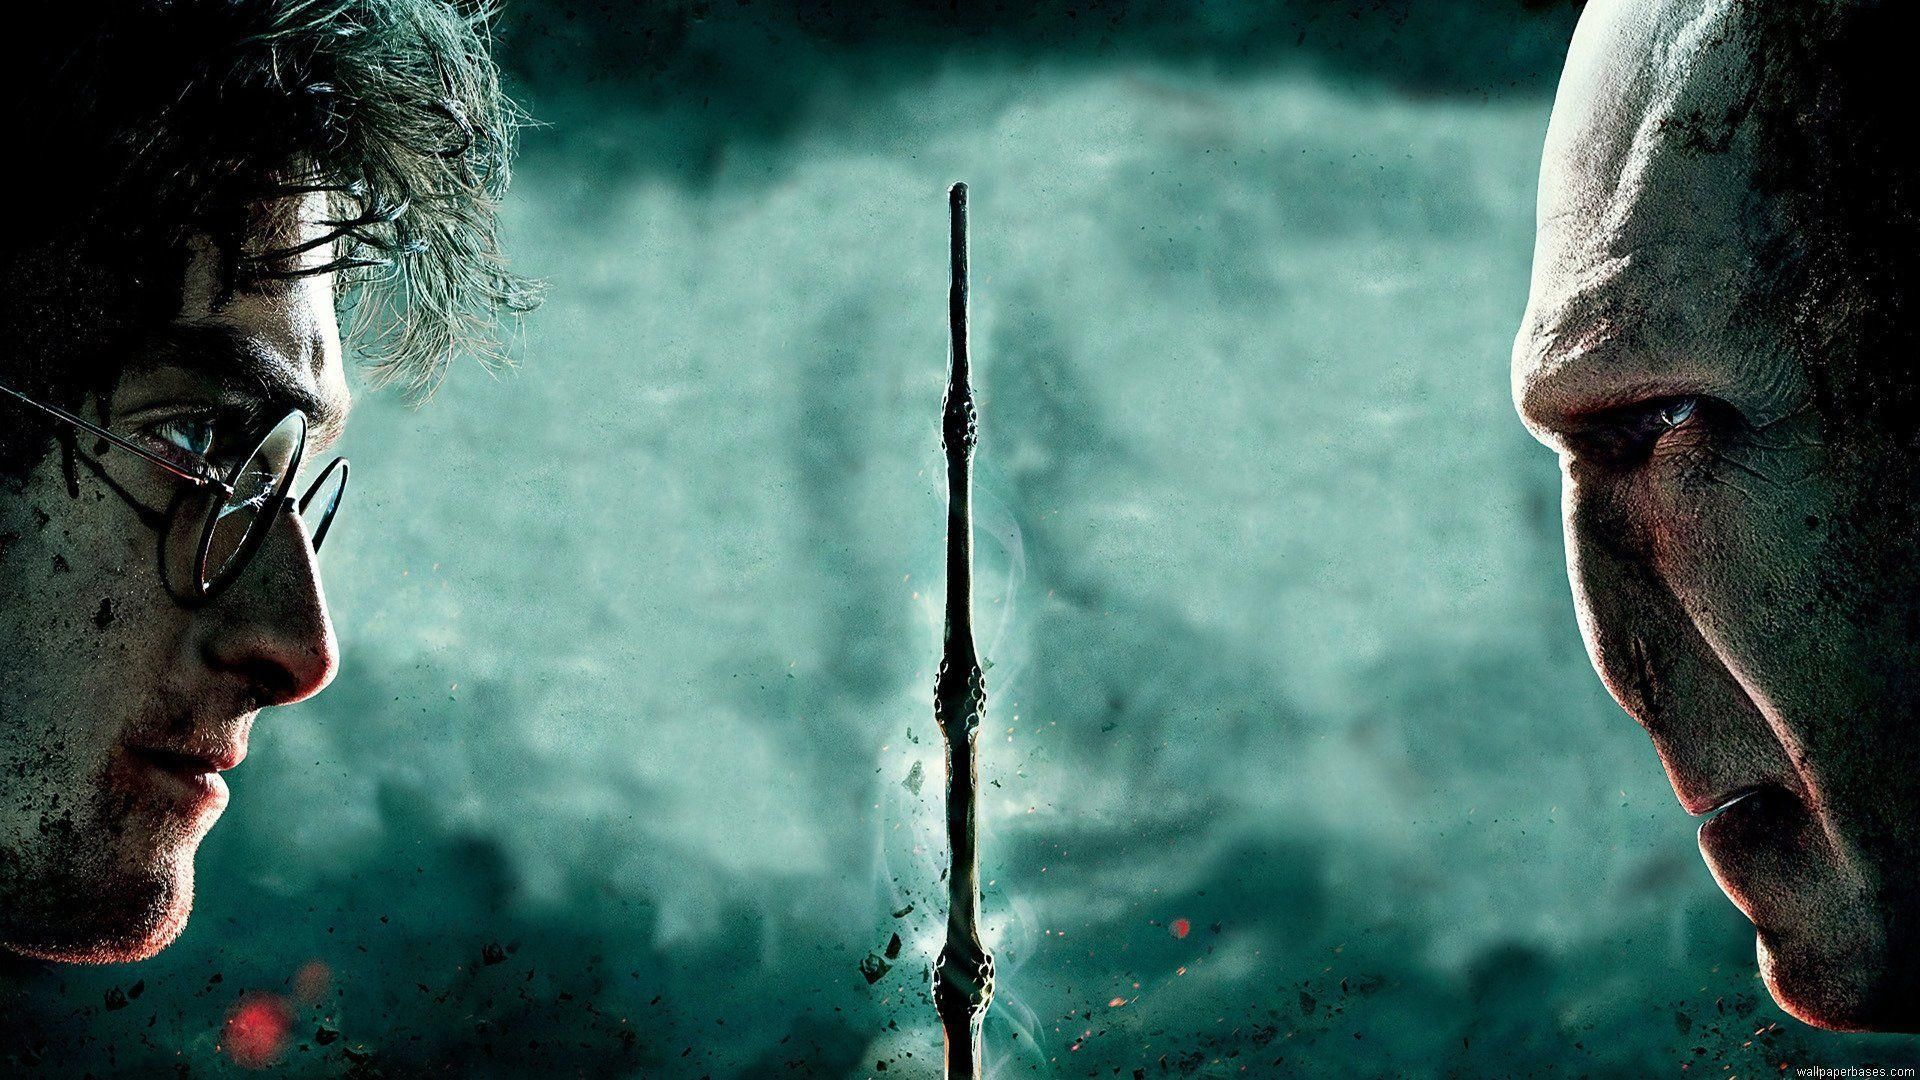 Image of Harry Potter (left) and Voldemort (right) looking at each other eye to eye, a wand is placed in the middle of the image